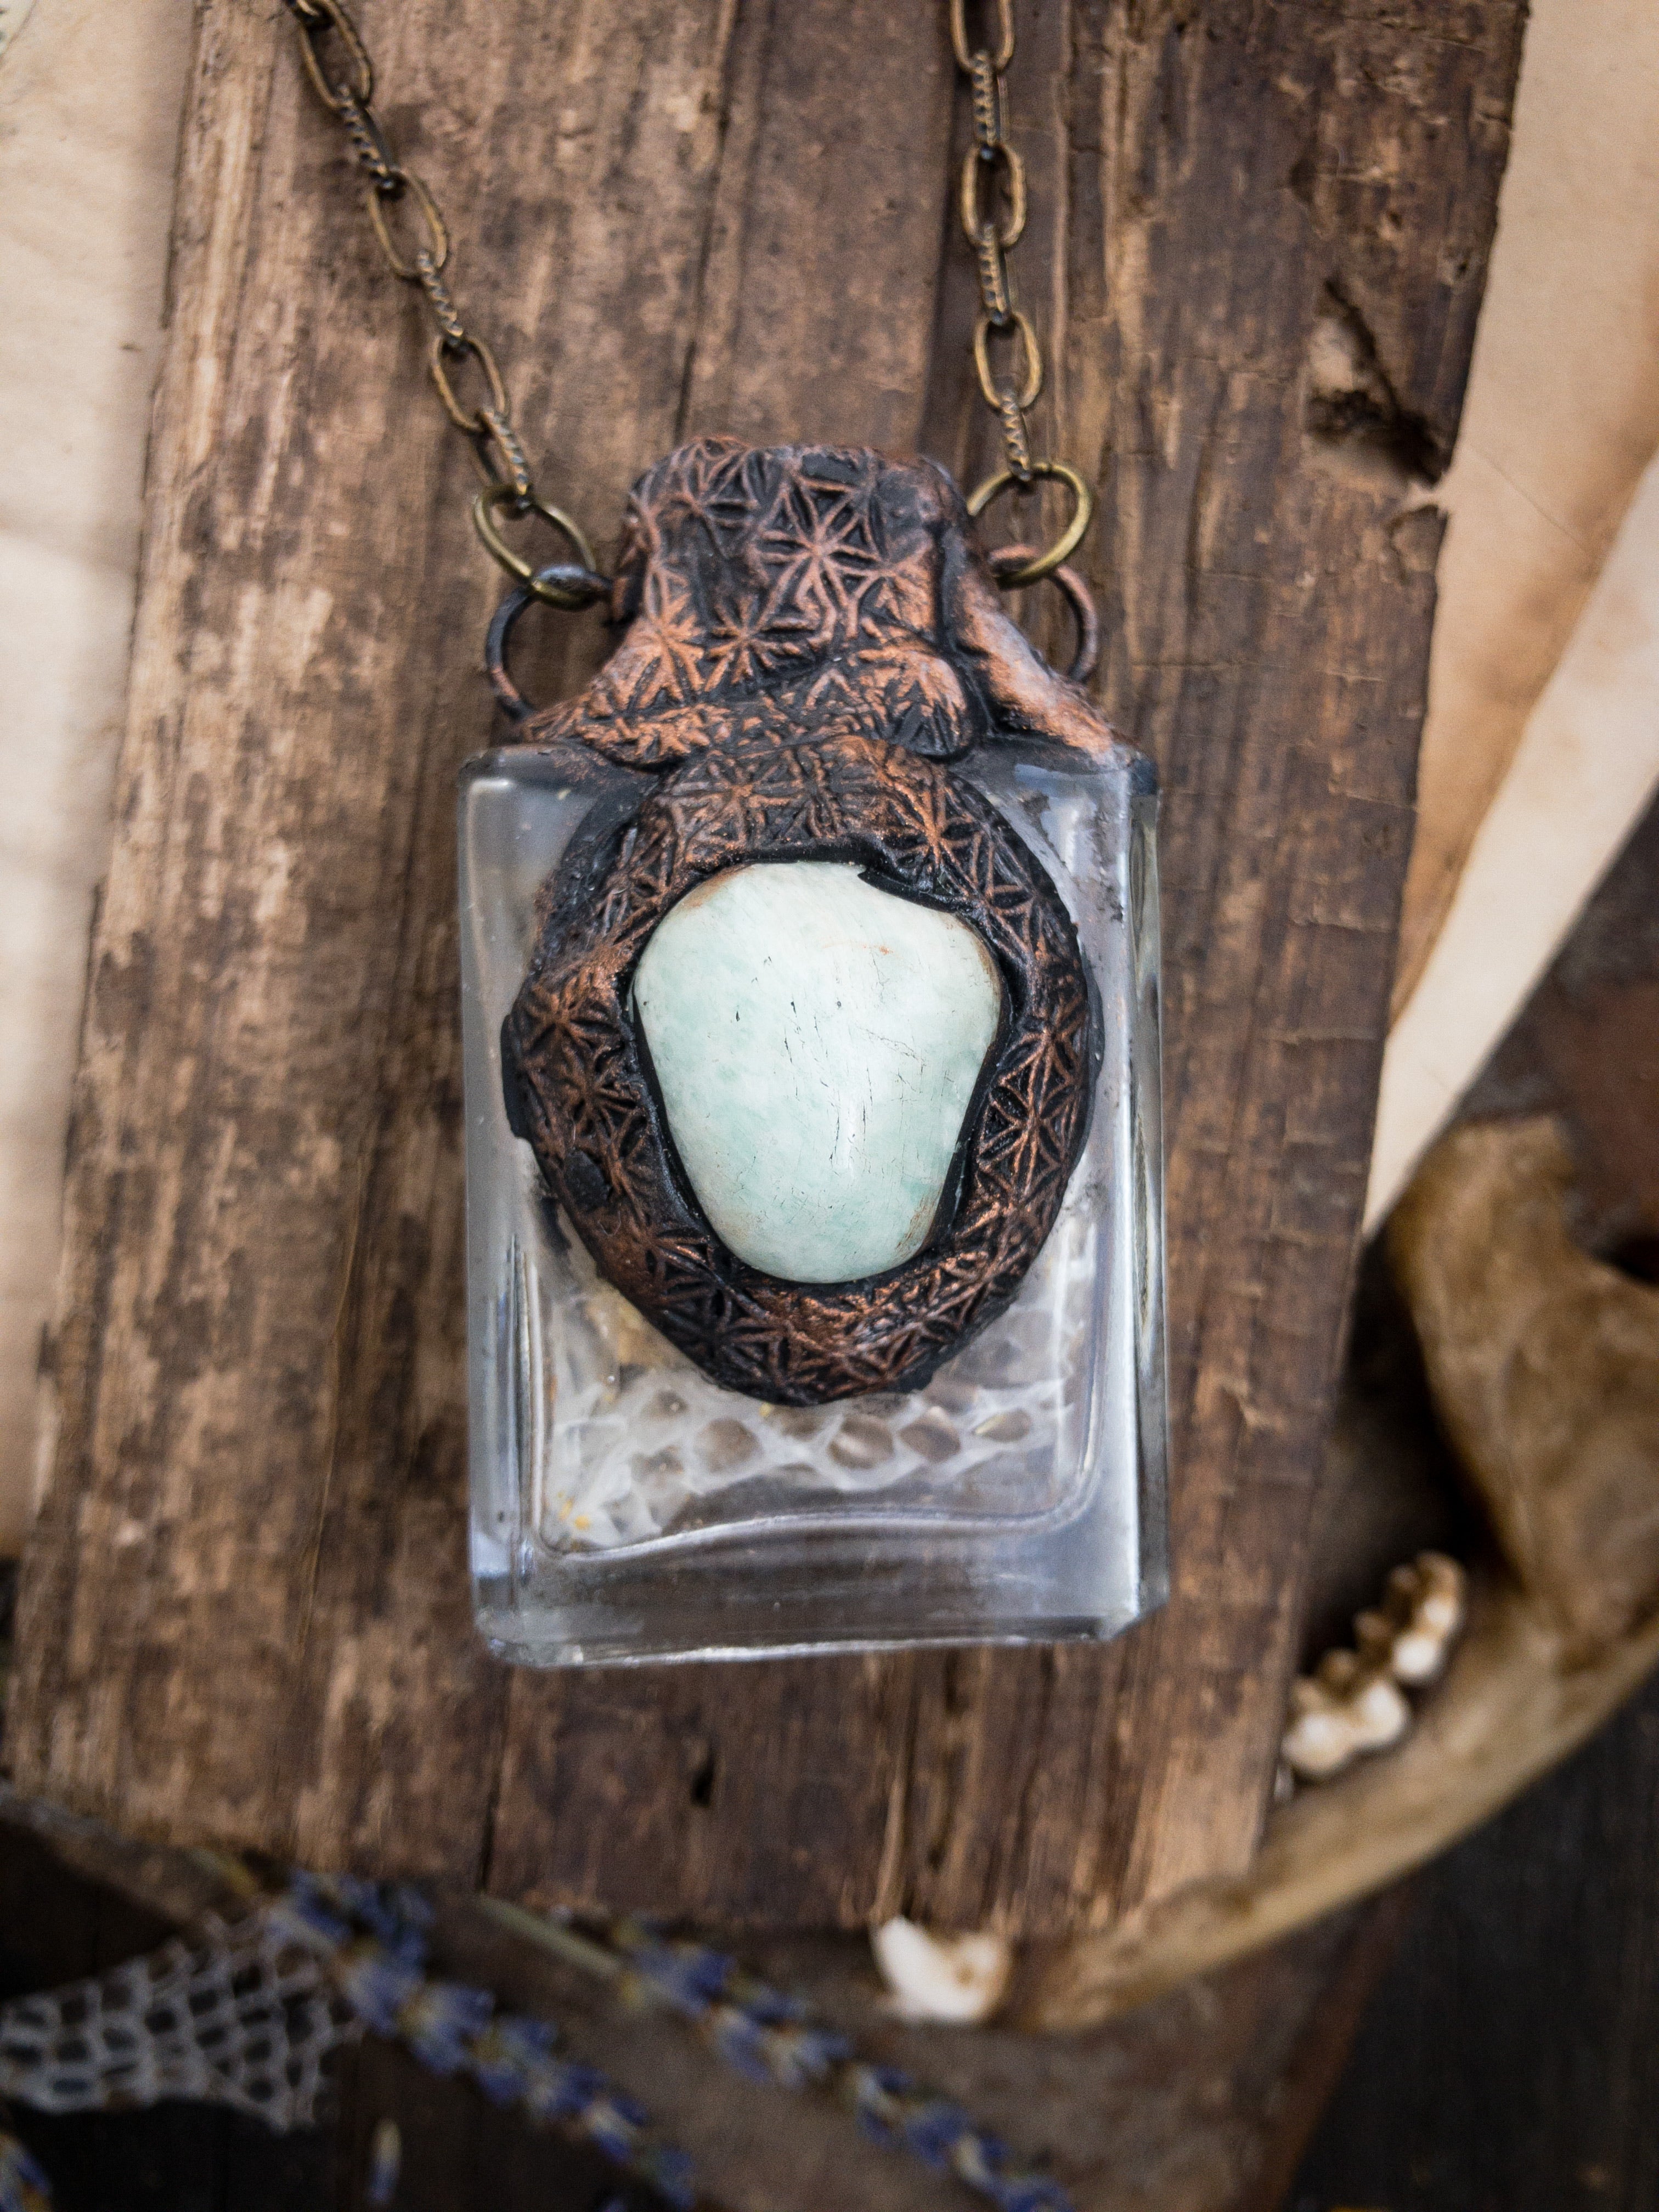 Gatekeeper Necklace with Snake Skin, Chrysoprase + Mugwort- A Necklace for Self Discovery and Transformation